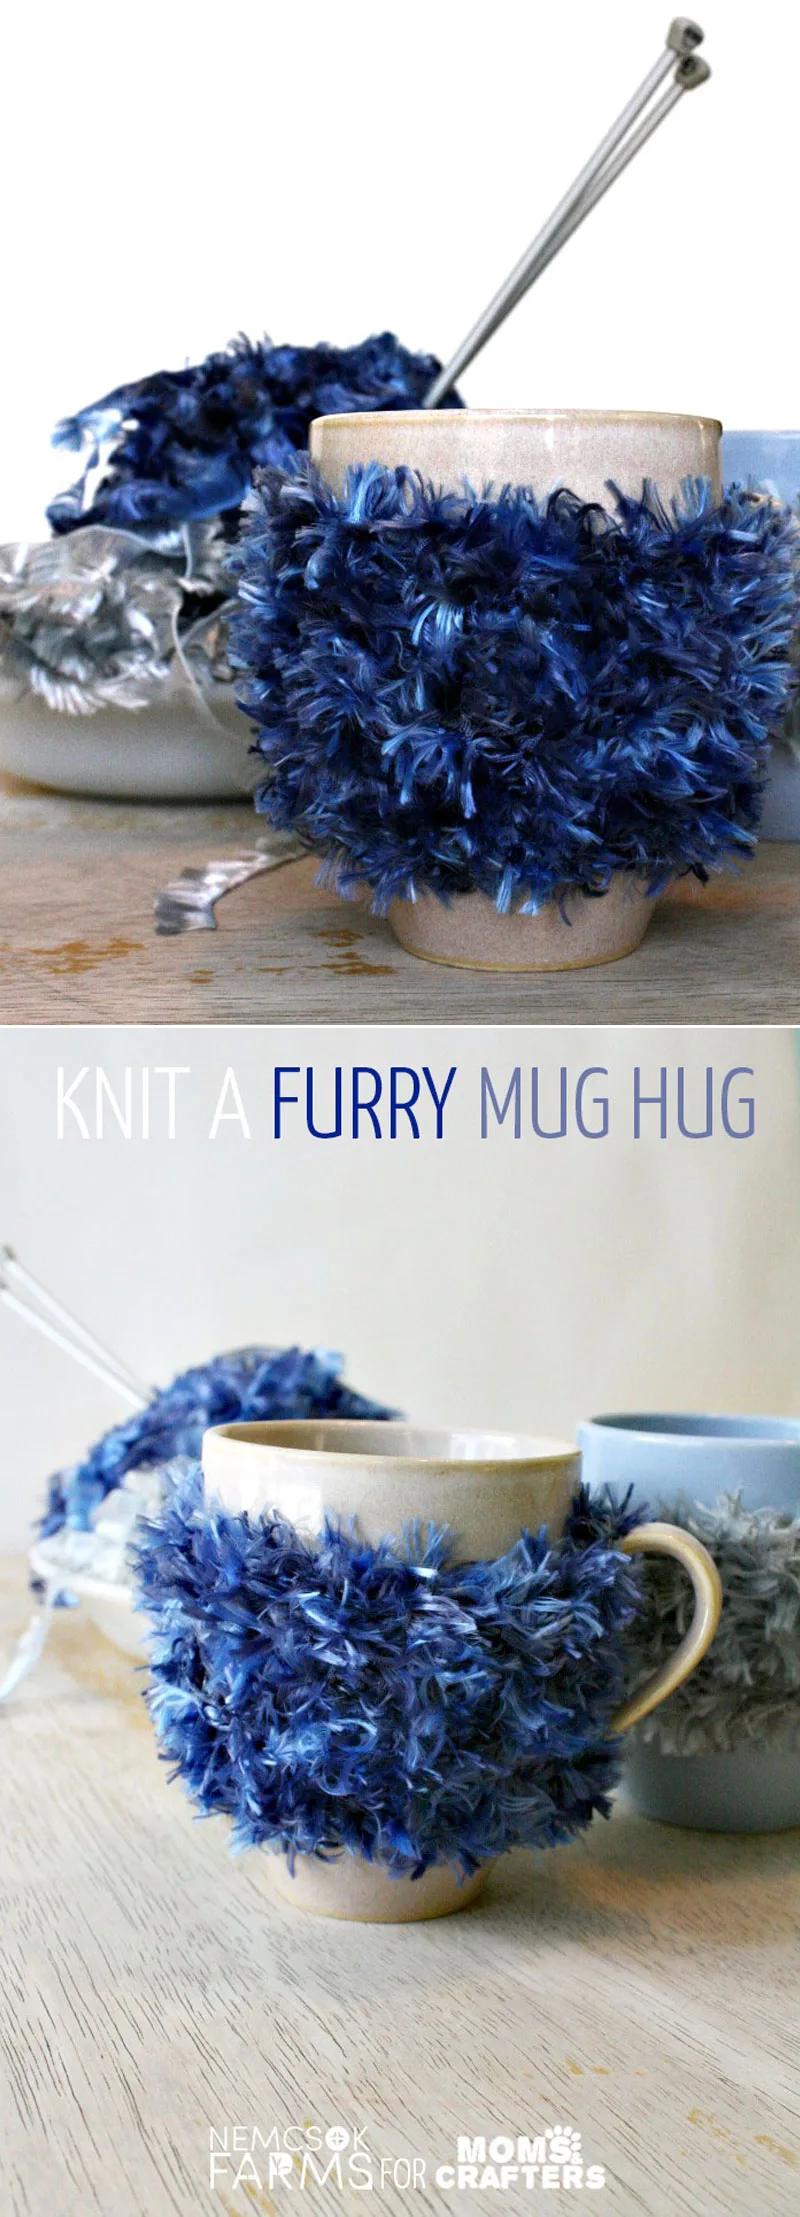 Knit a fun furry mug hug - this easy DIY mug cozy tutorial is the perfect beginner knitting project for teens and tweens and includes a free knitting pattern!